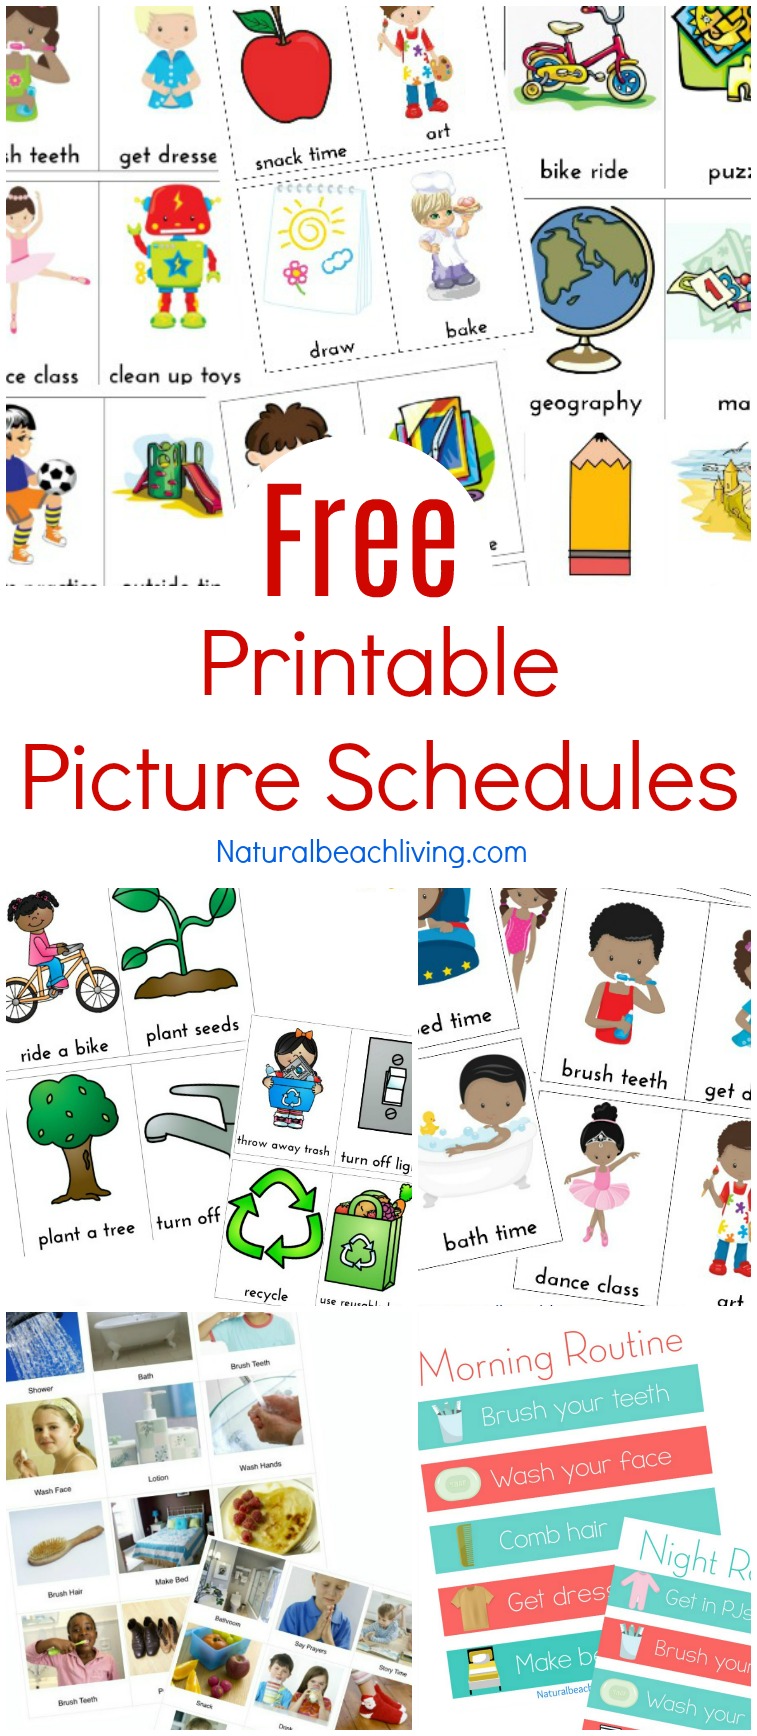 10 Autism Visual Schedule Printables for Kids, Autism Visual Schedule Free Printables, Autism Visual Schedule for the Home, Picture schedule, Autism Visual Schedule, Free printable visual schedule for preschool, Visual schedule for home, many advantages to using Autism Visual Schedules for your home and daily routines for children #autism #visualschedules #parenting #dailyschedules #picturecards